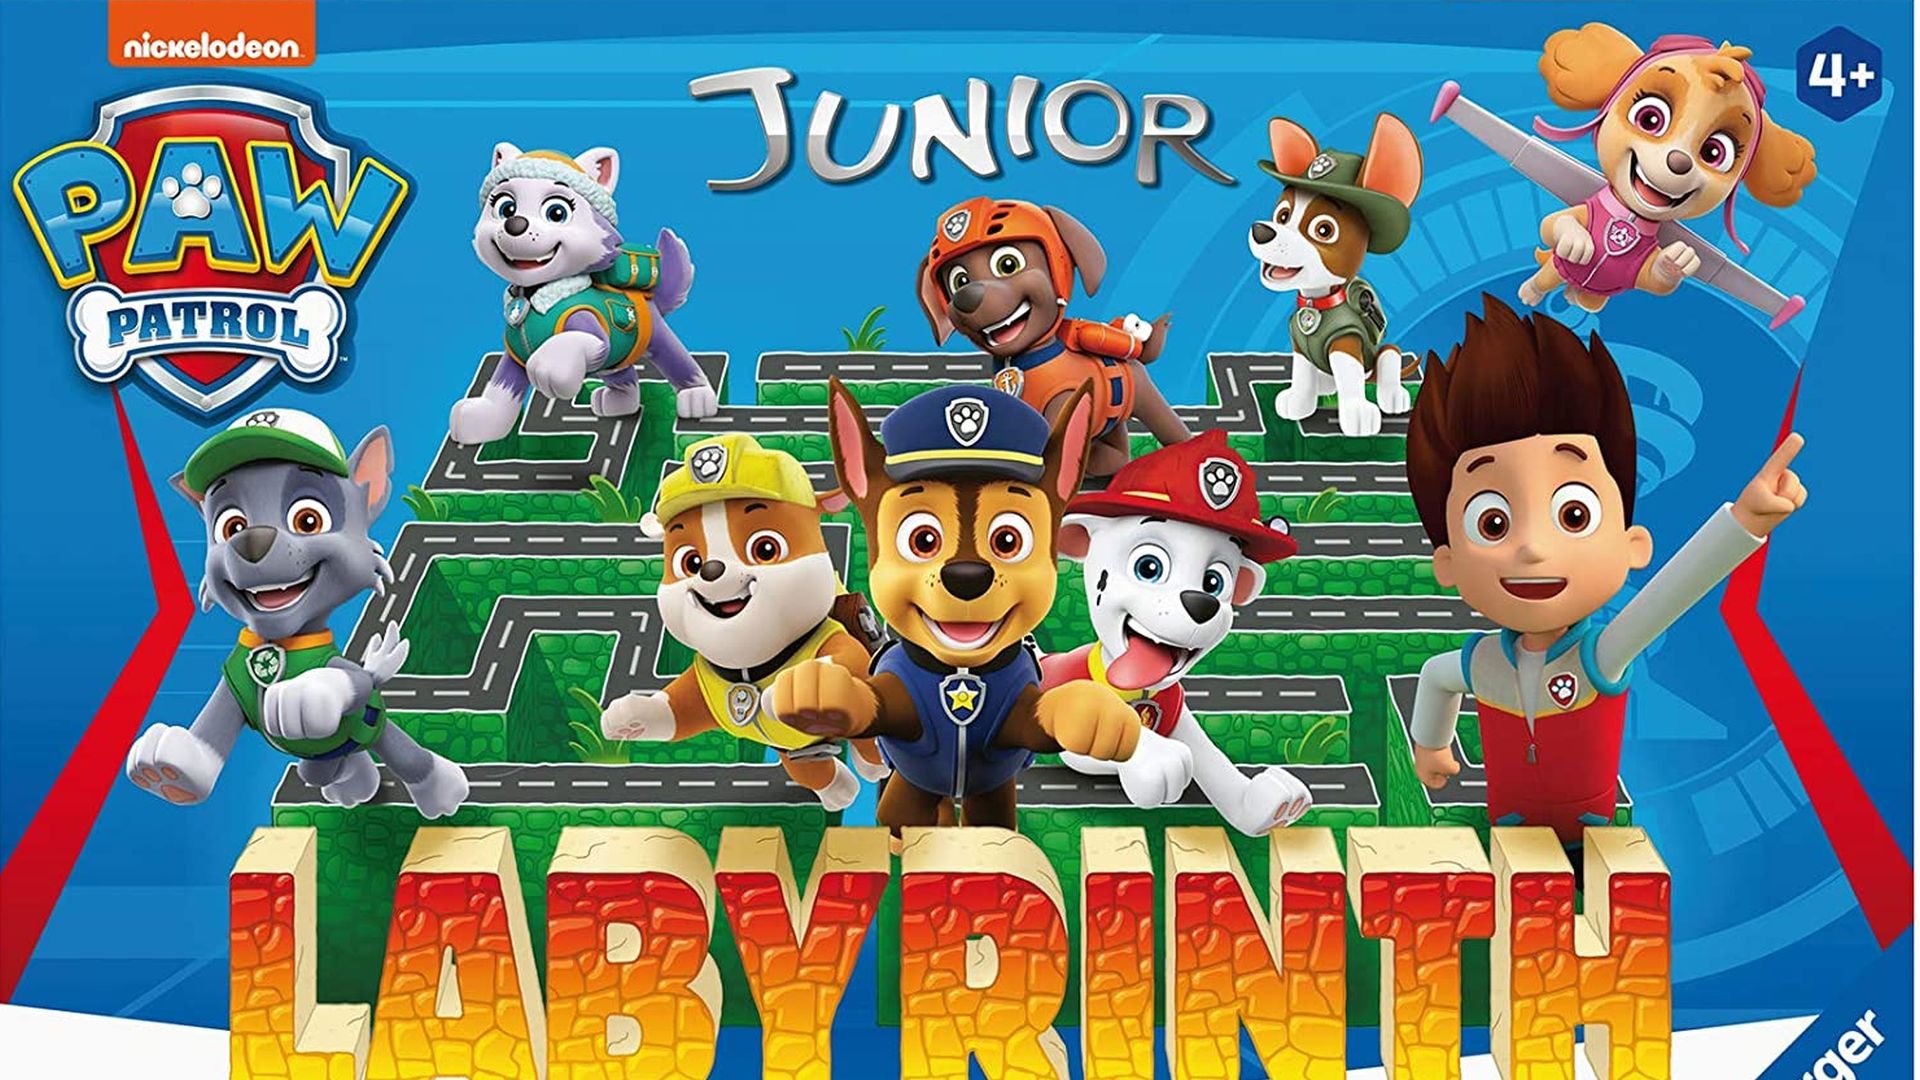 PATROL JUNIOR is a Great Family Game — GeekTyrant